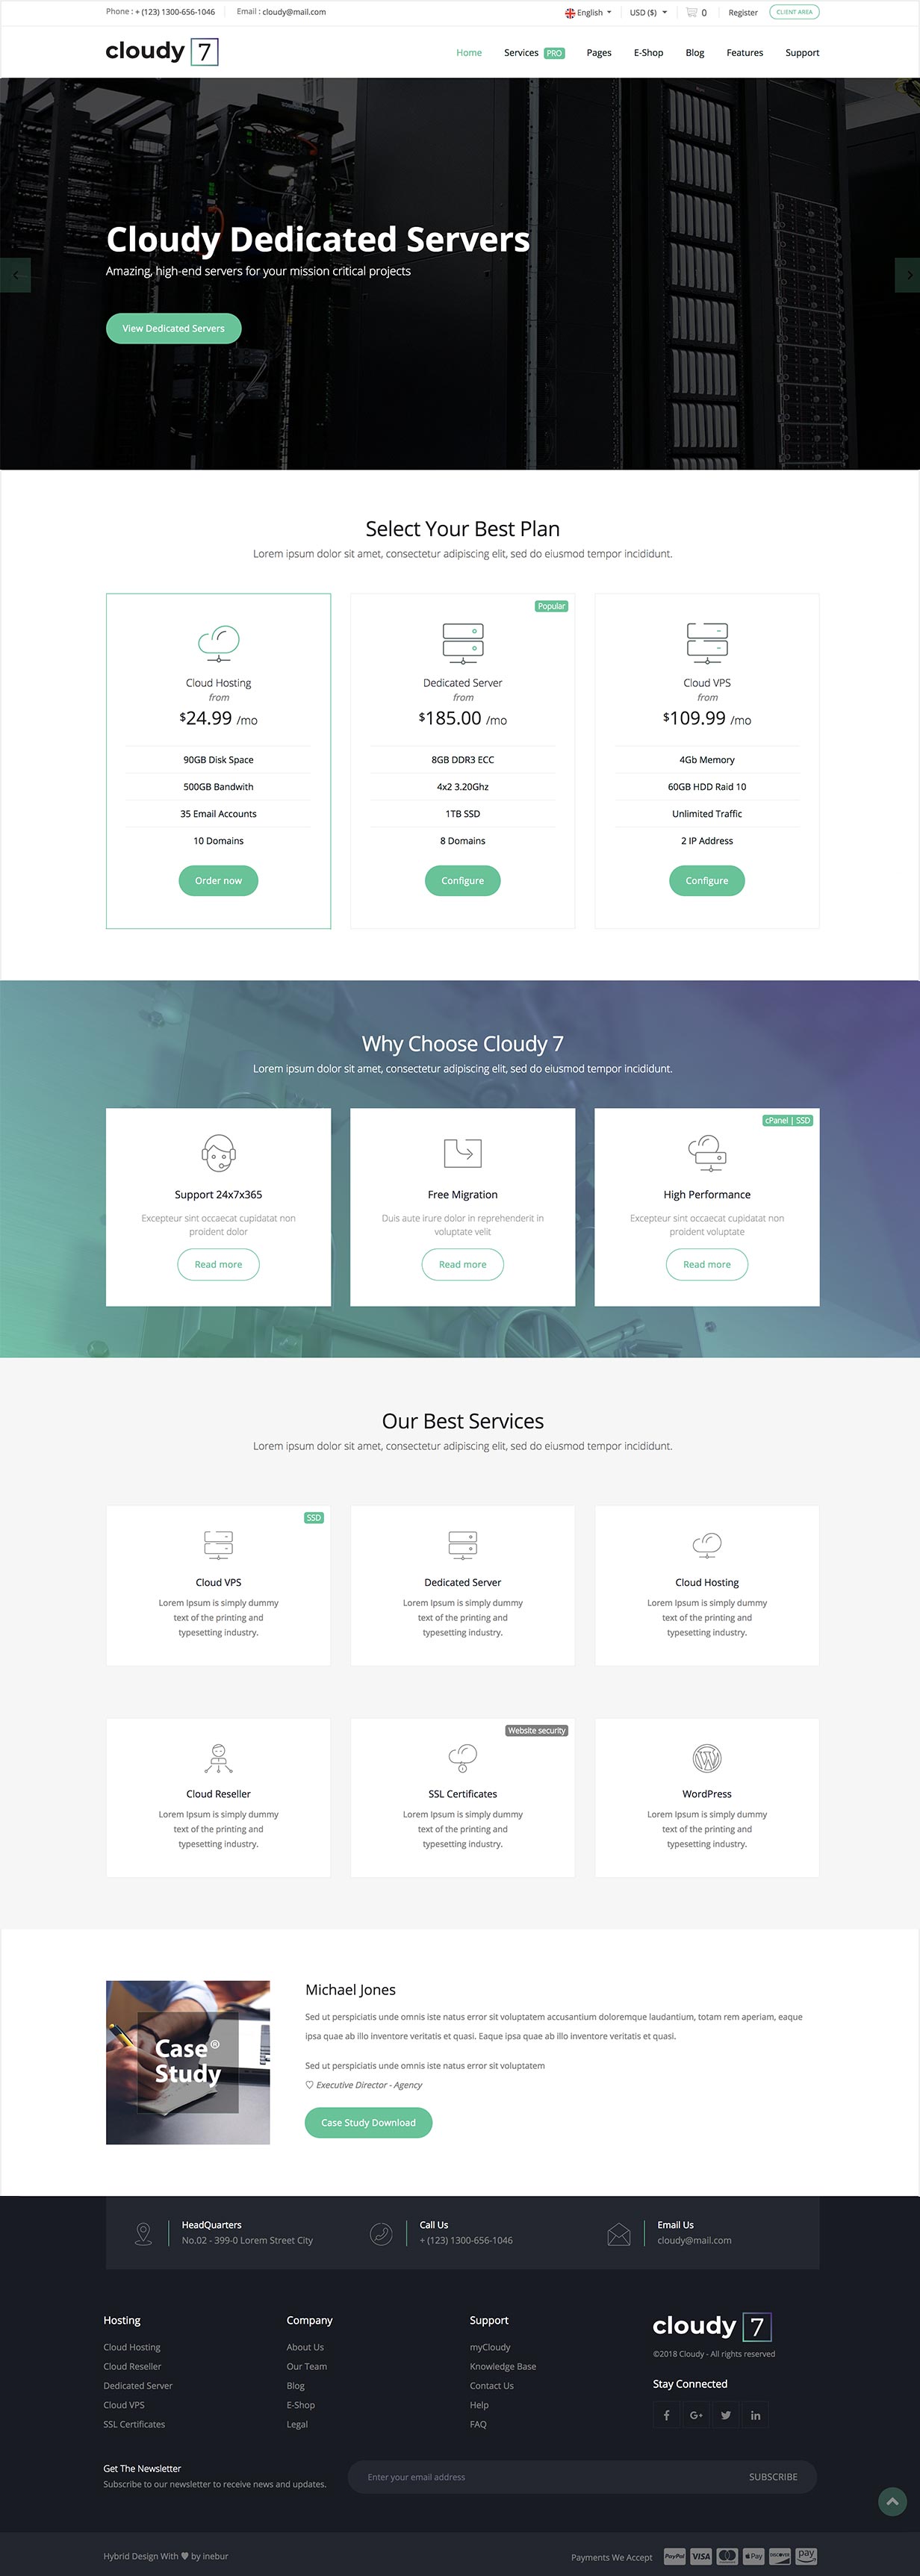 cloudy template - Cloudy 7 - Hosting Service & WHMCS Template